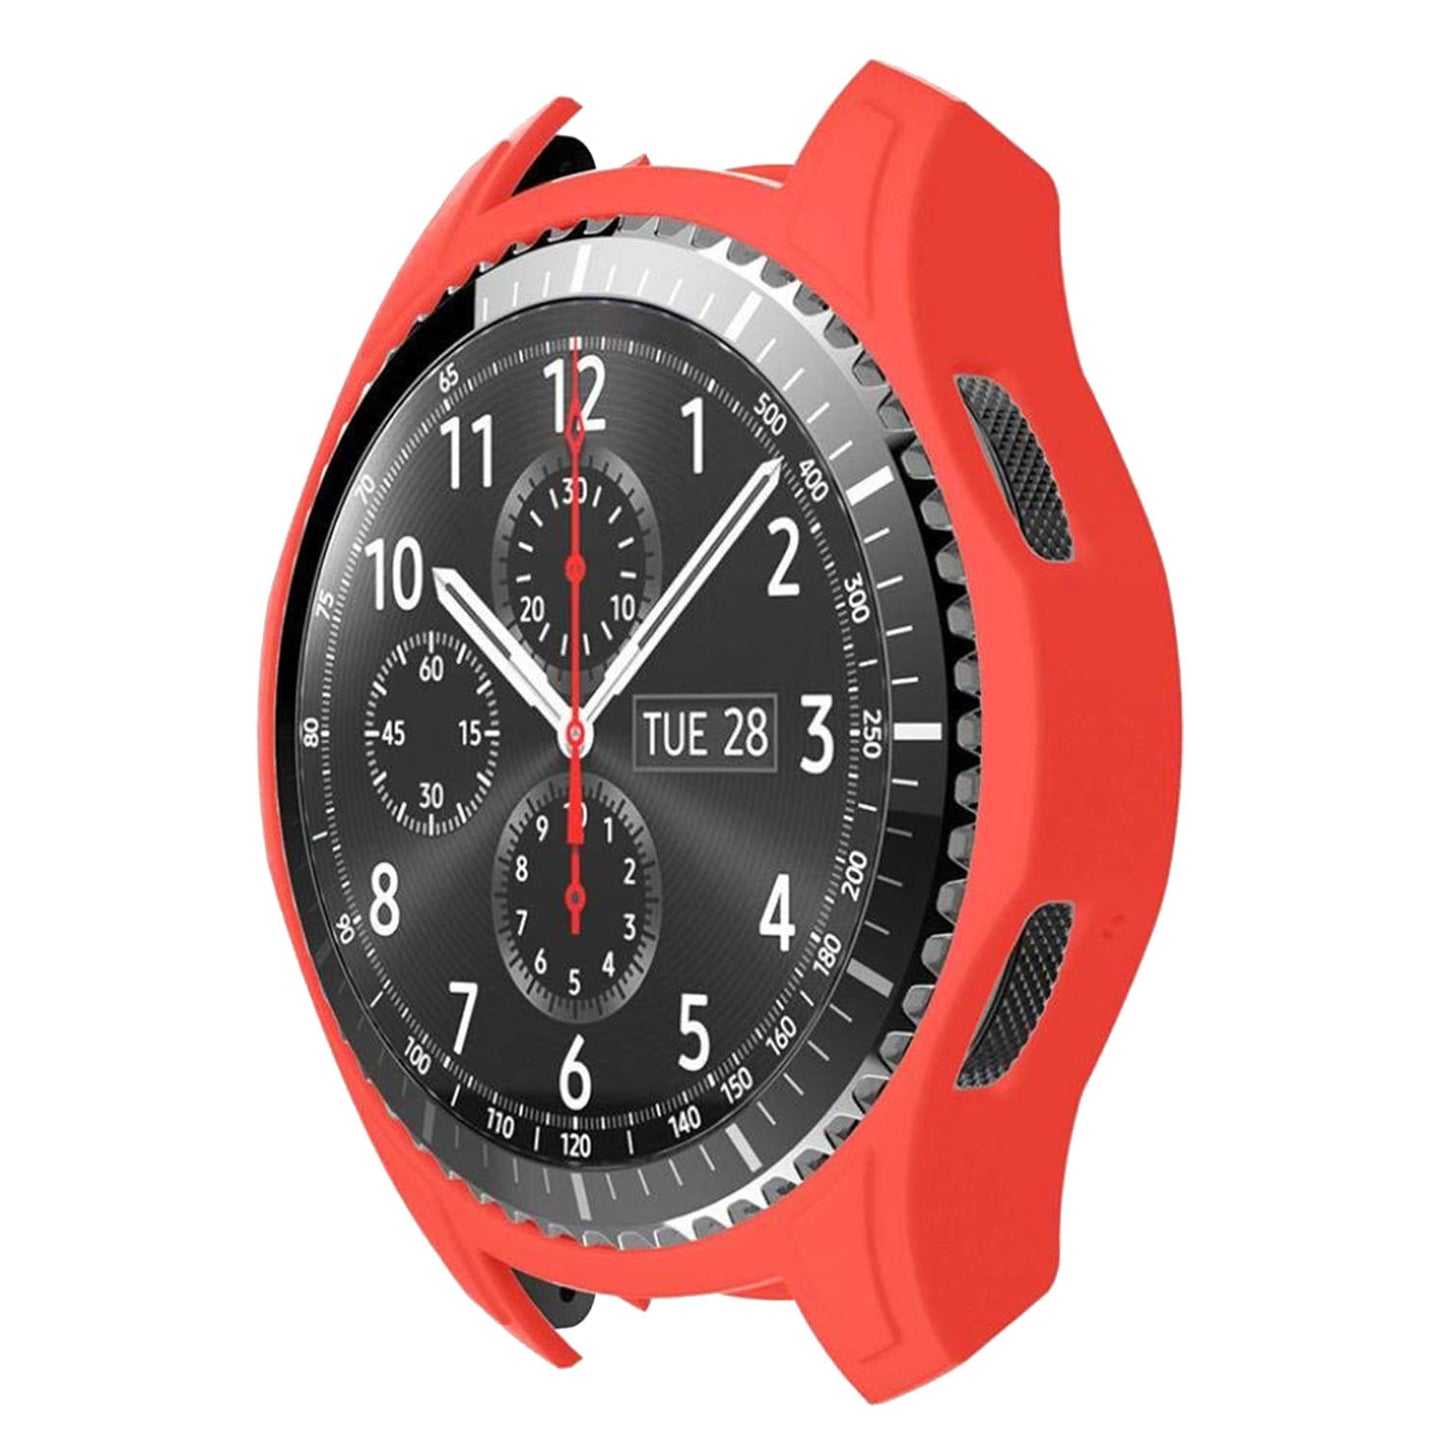 Rubber Protective Case for Samsung Gear S3